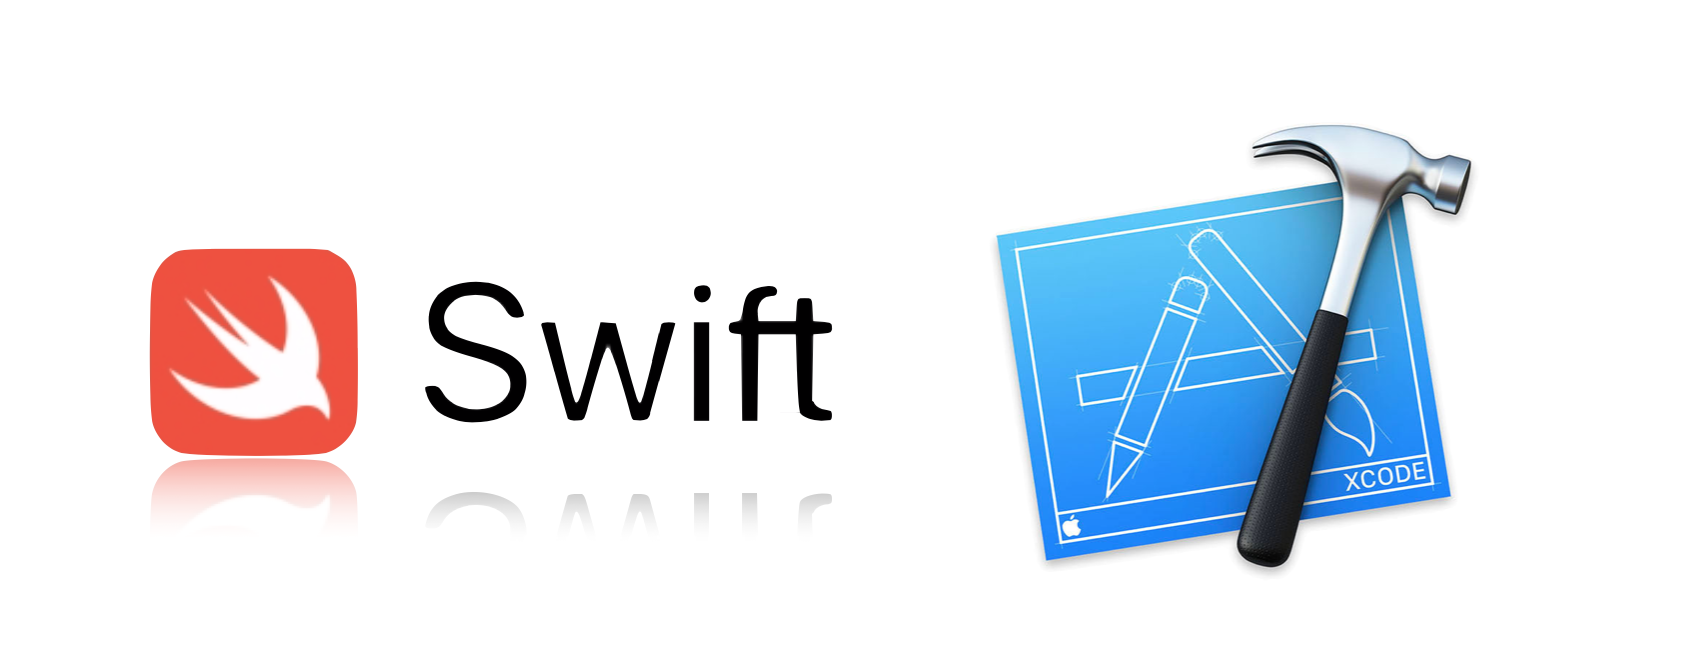 latest version of xcode and swift